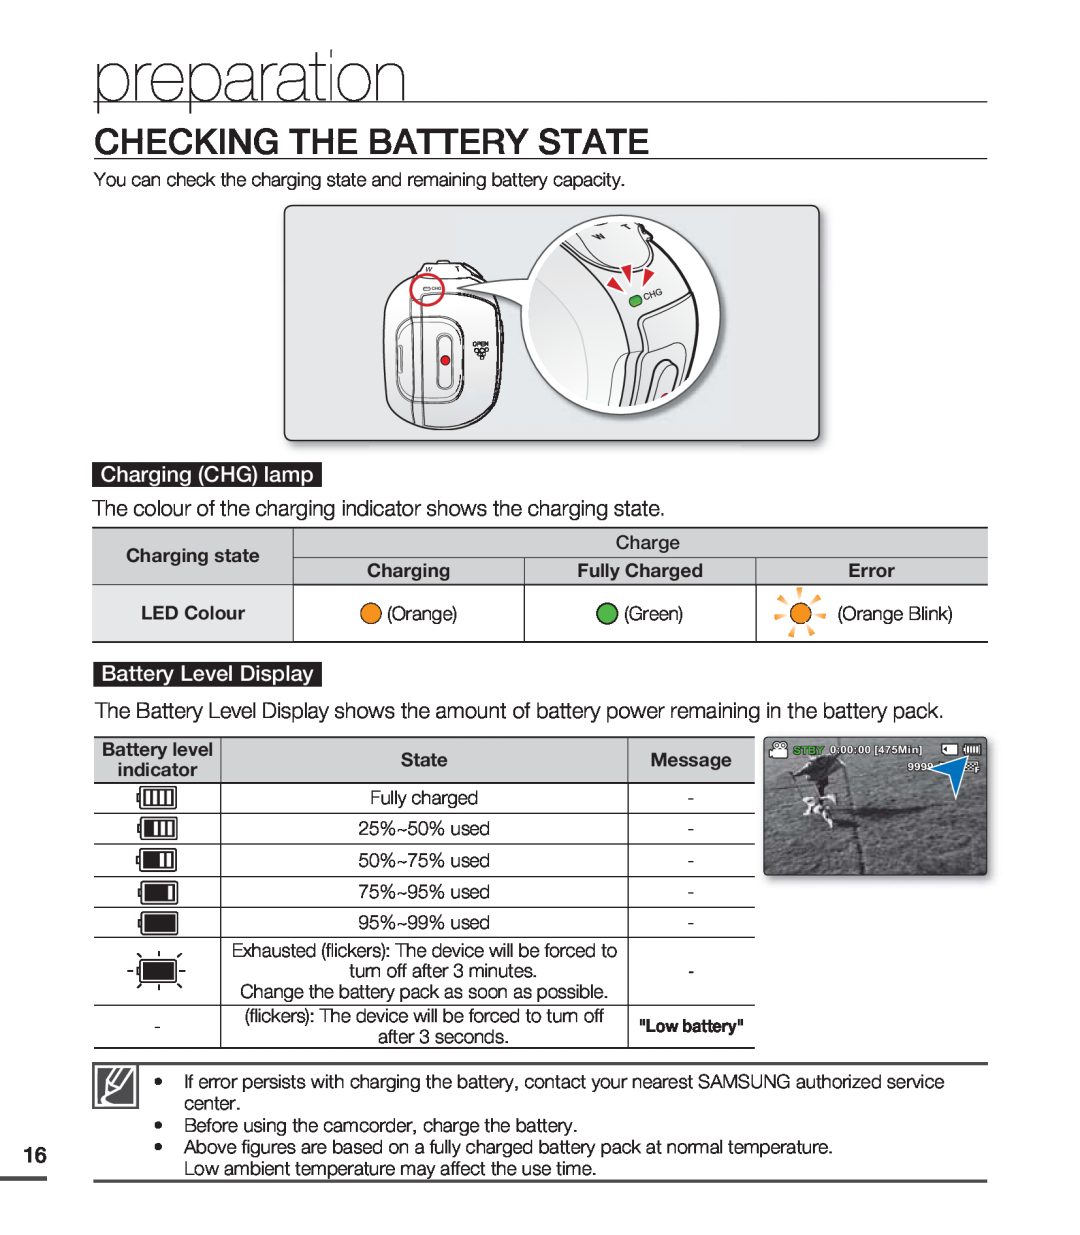 Samsung SMX-C20RP/XSV Checking The Battery State, Charging CHG lamp, Battery Level Display, preparation, Charge, Error 